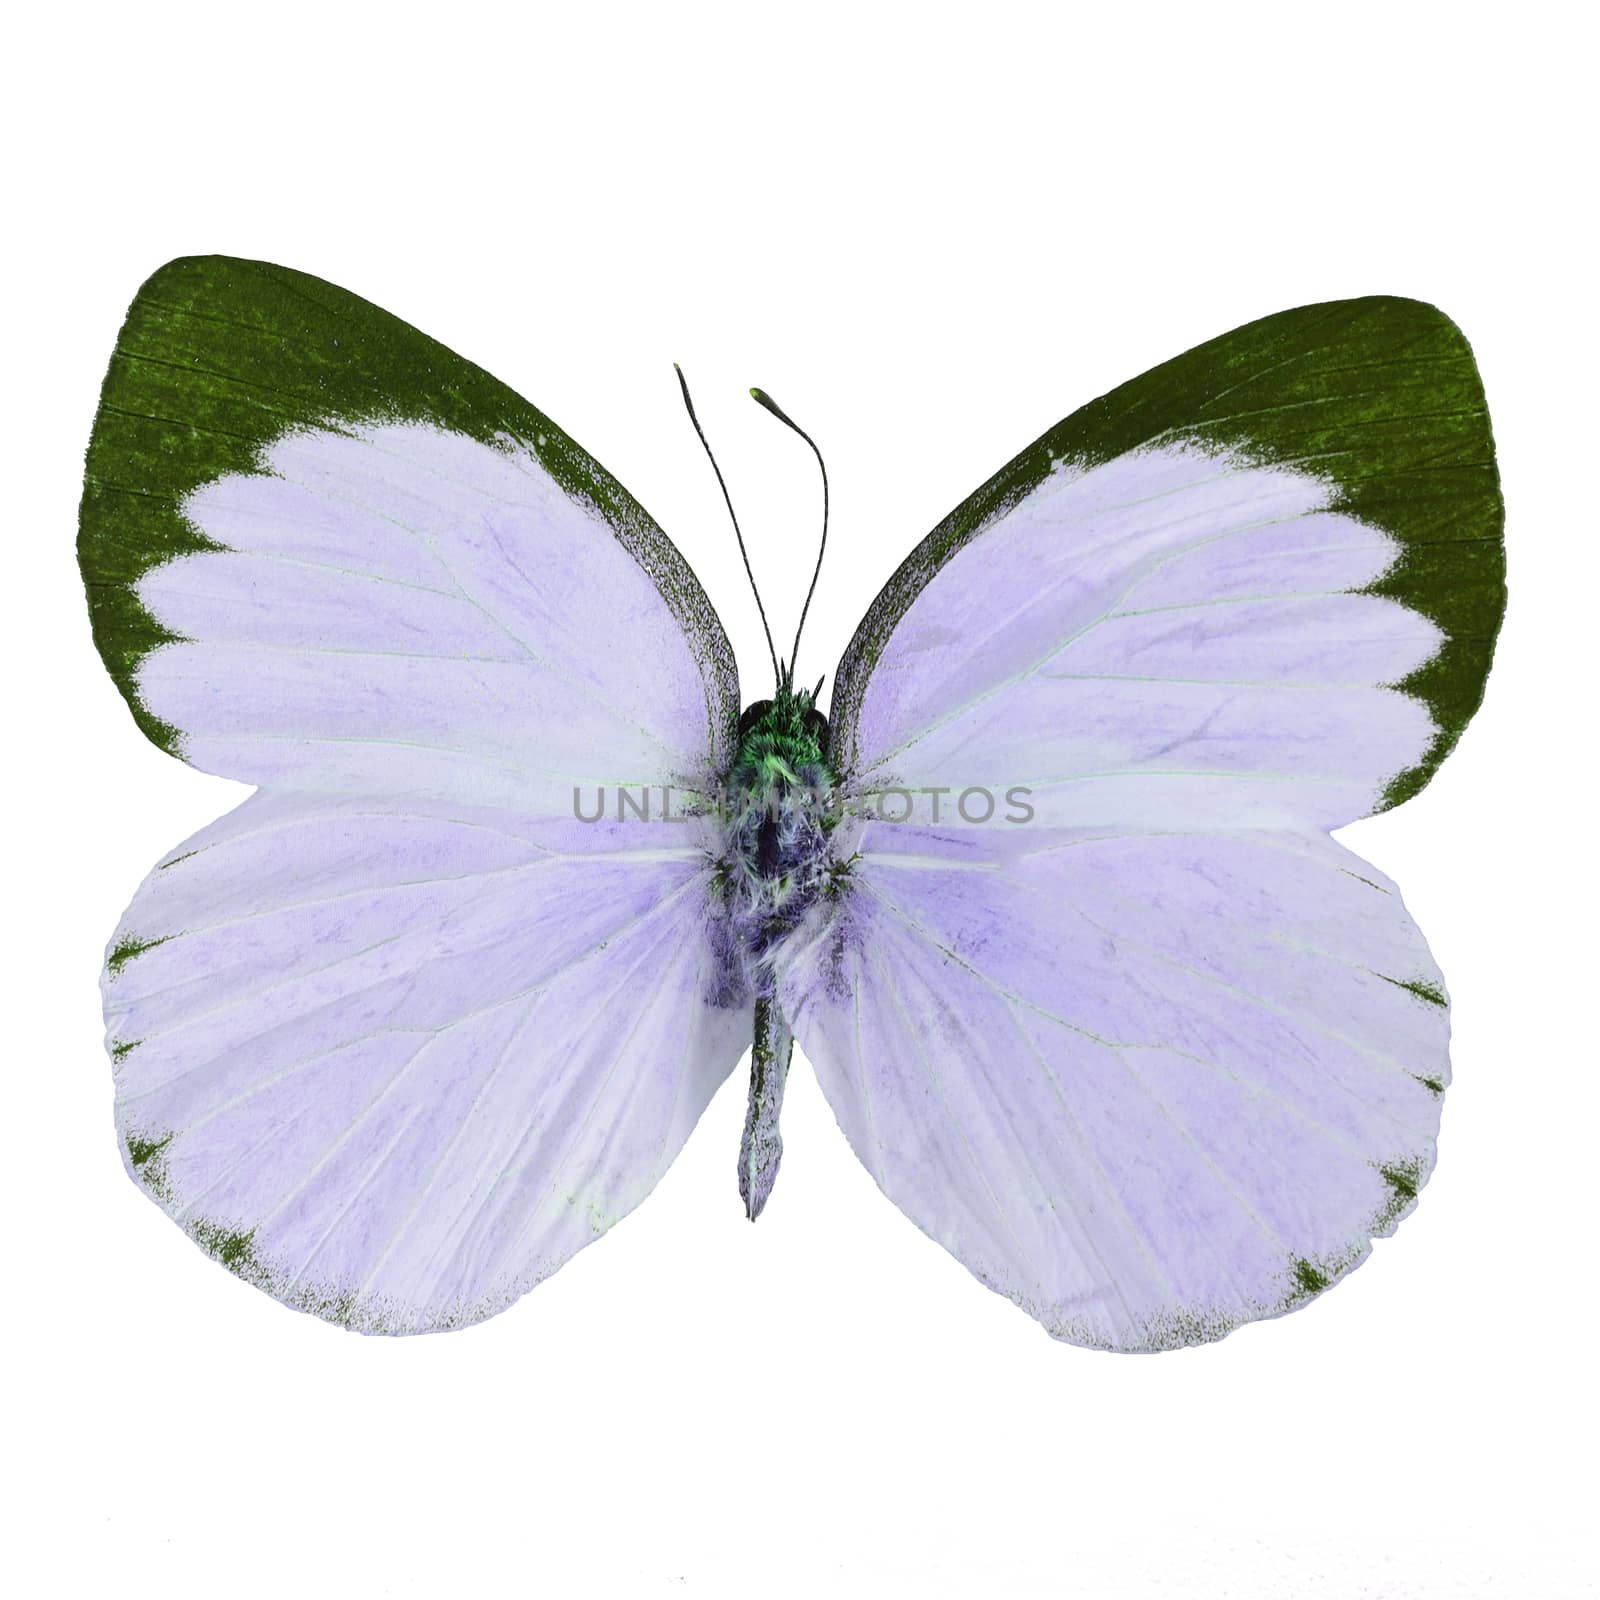 Purple butterfly, Delias butterfly (Delias belisama) in fancy color profile, isolated on white background